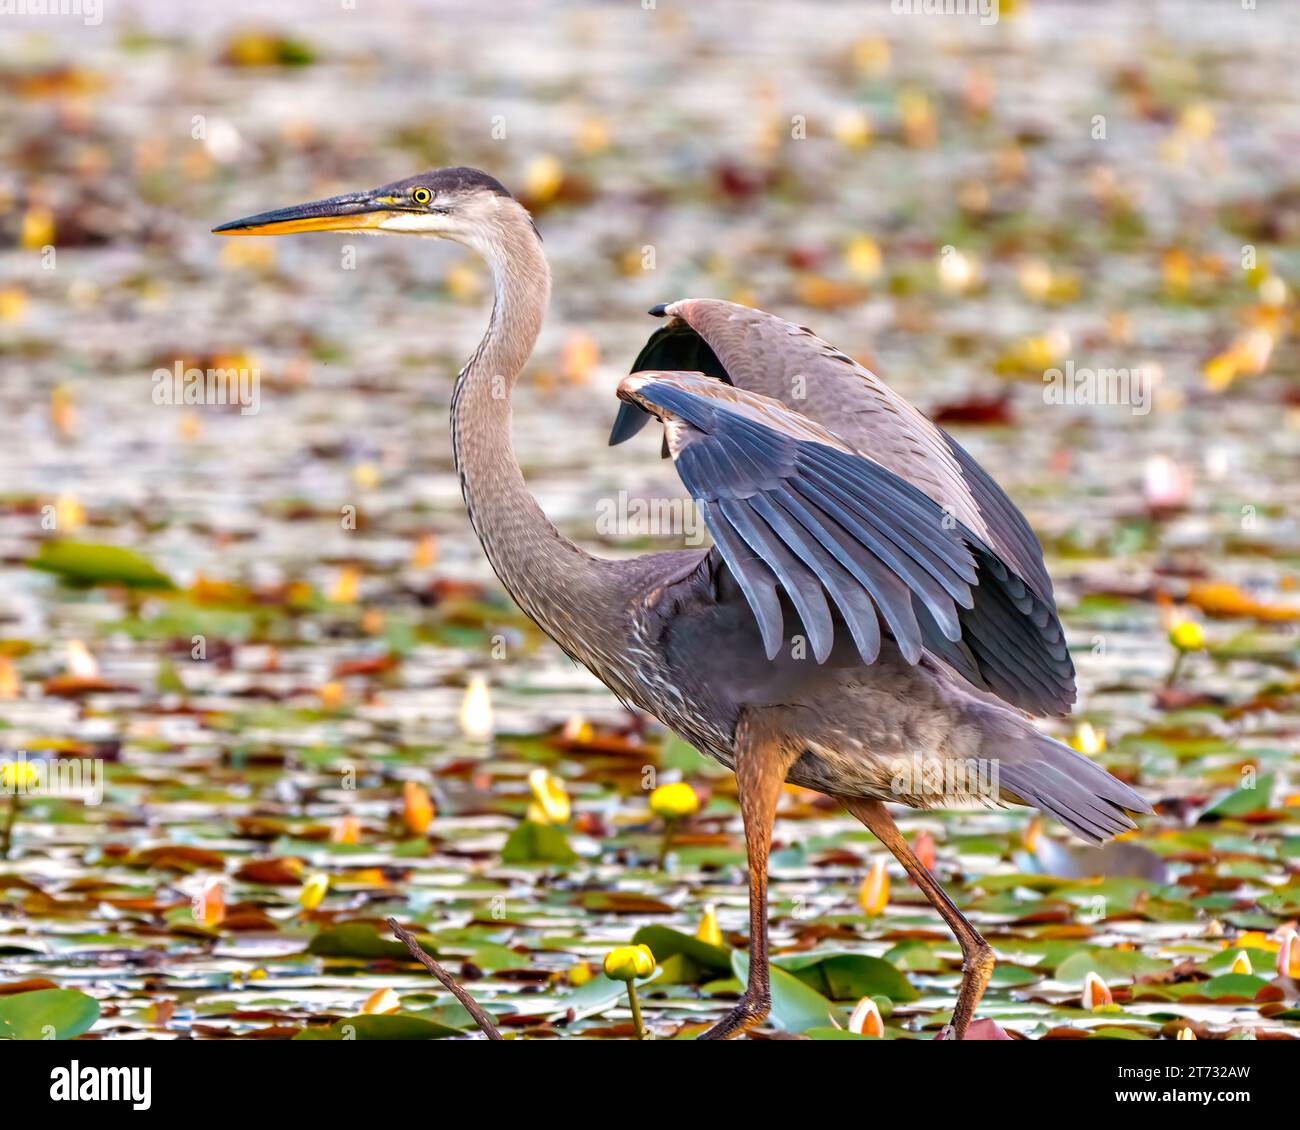 Blue Heron close-up side view with spread wings in water with water lily pads in its environment and habitat surrounding. Great Blue Heron Picture. Stock Photo